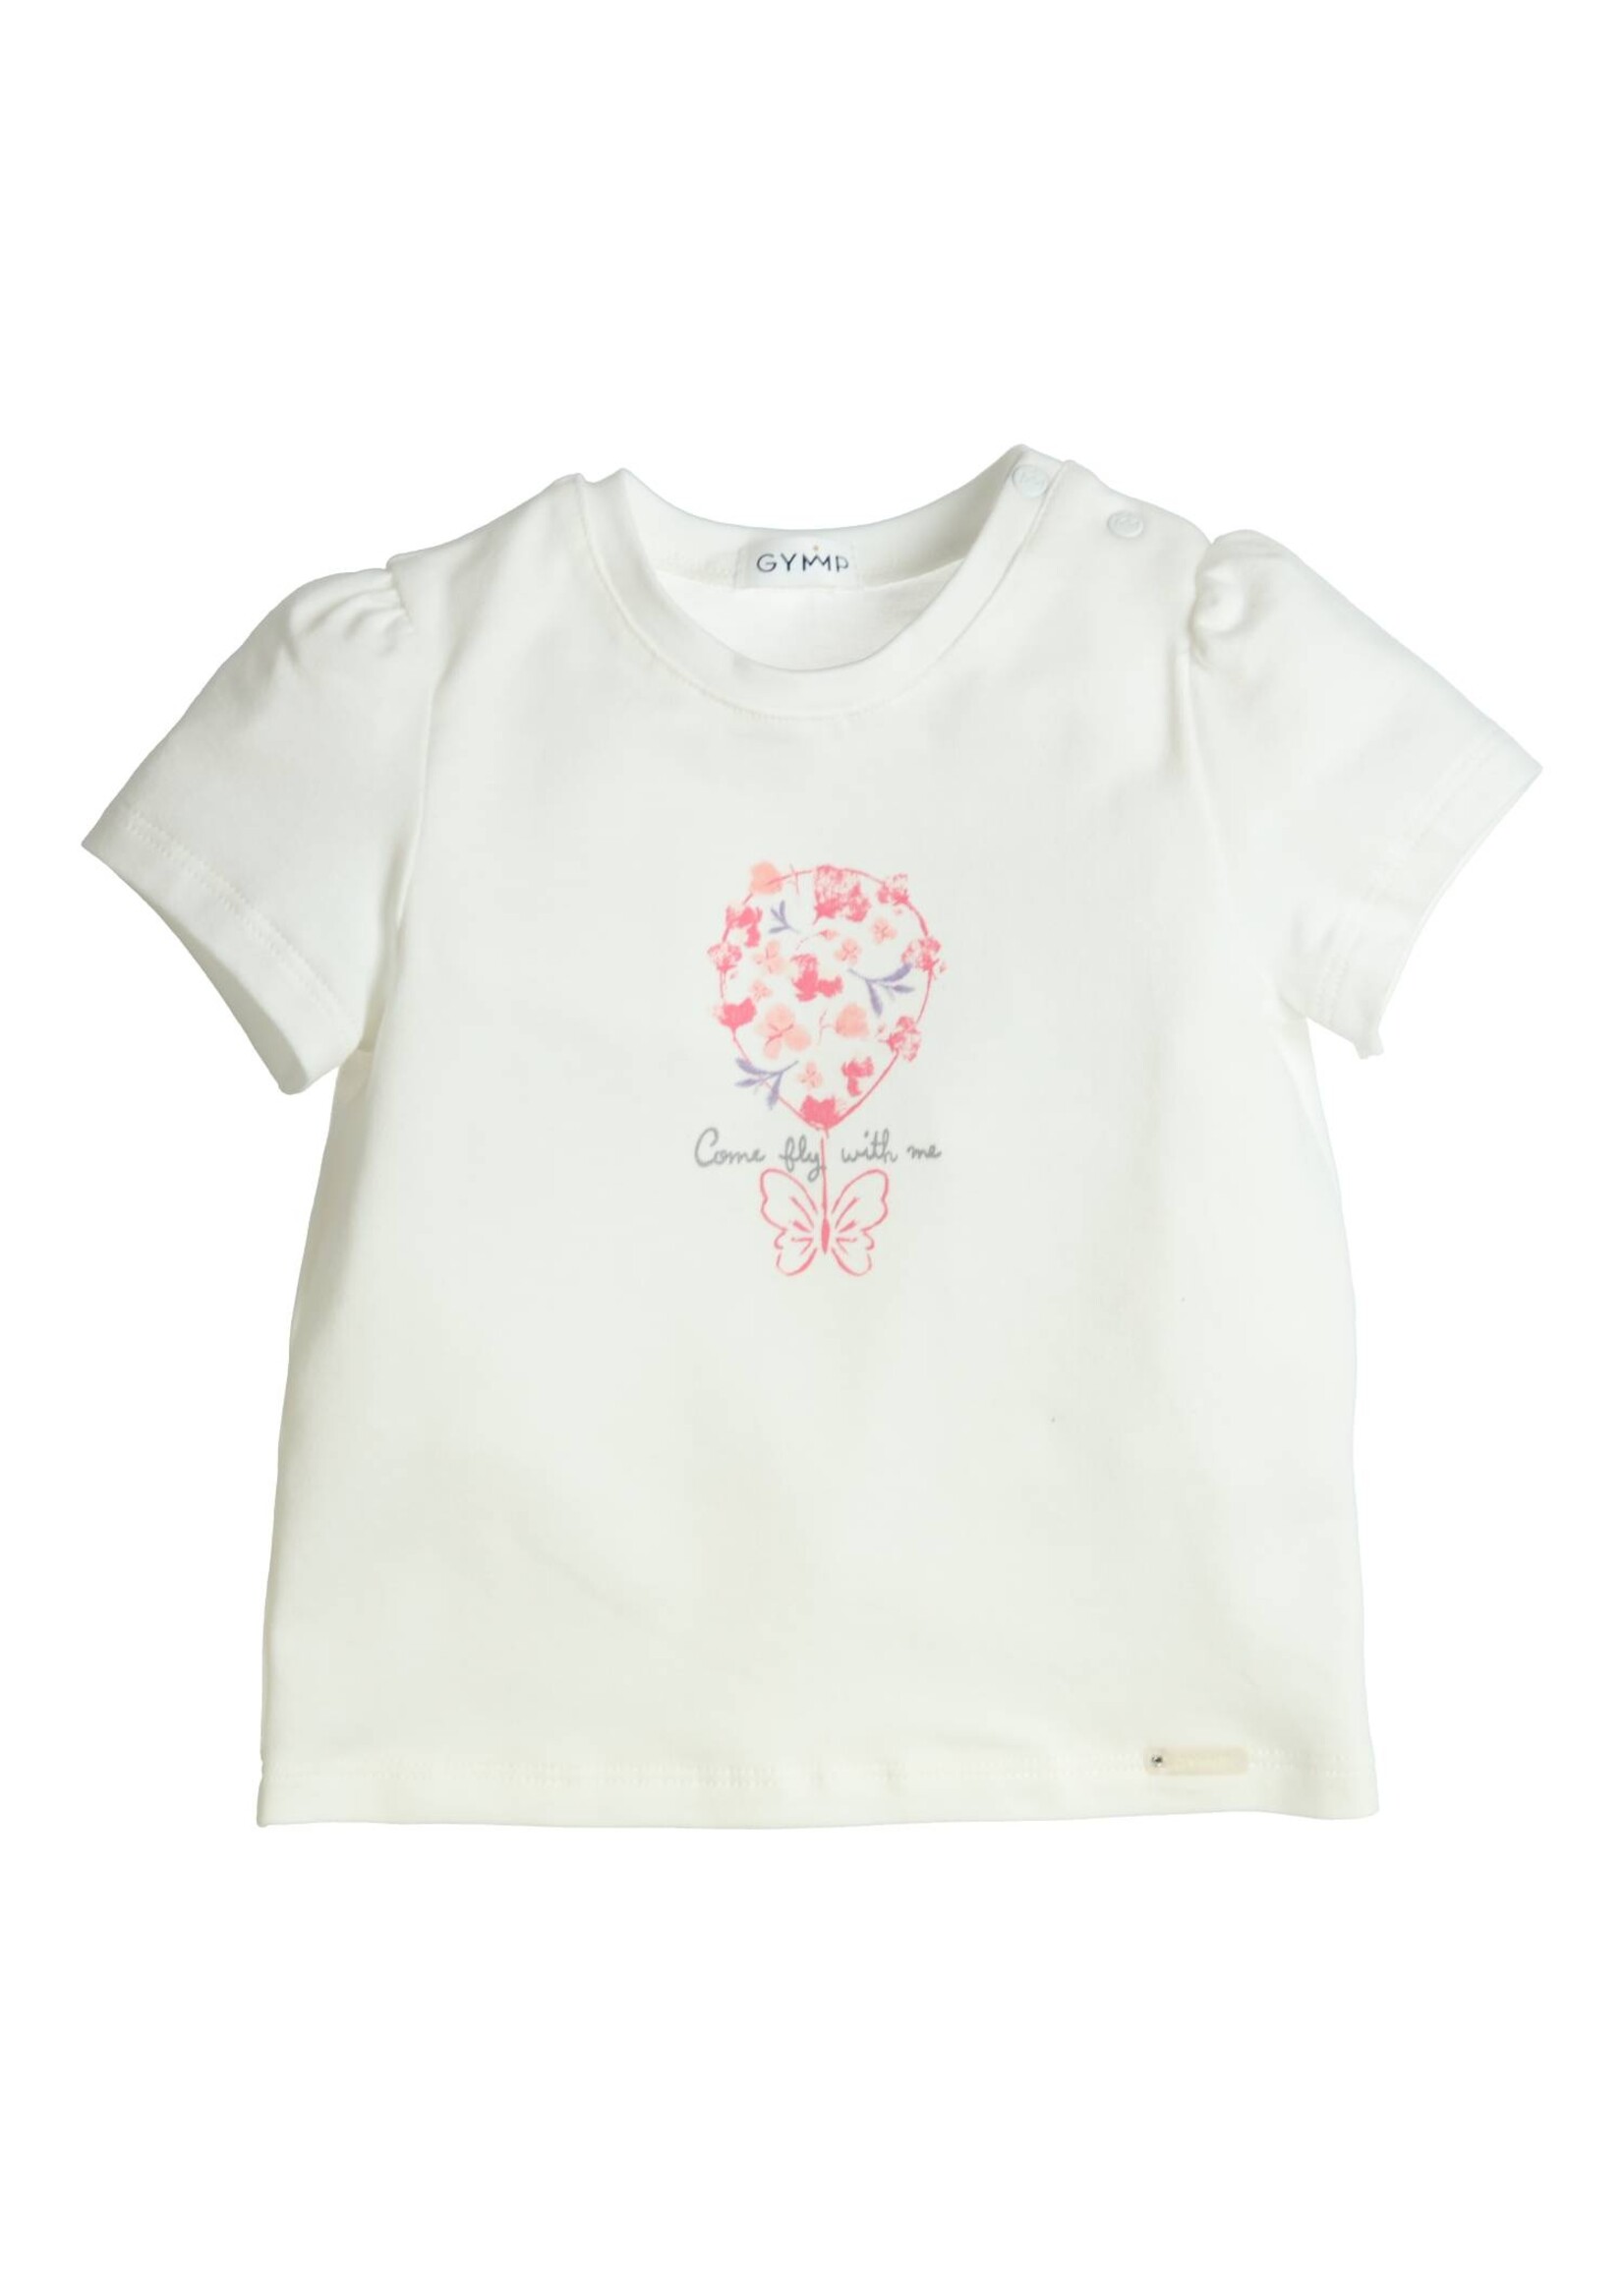 Gymp Girls T-shirt Aerobic Come fly with me 353-4376-10 Off White